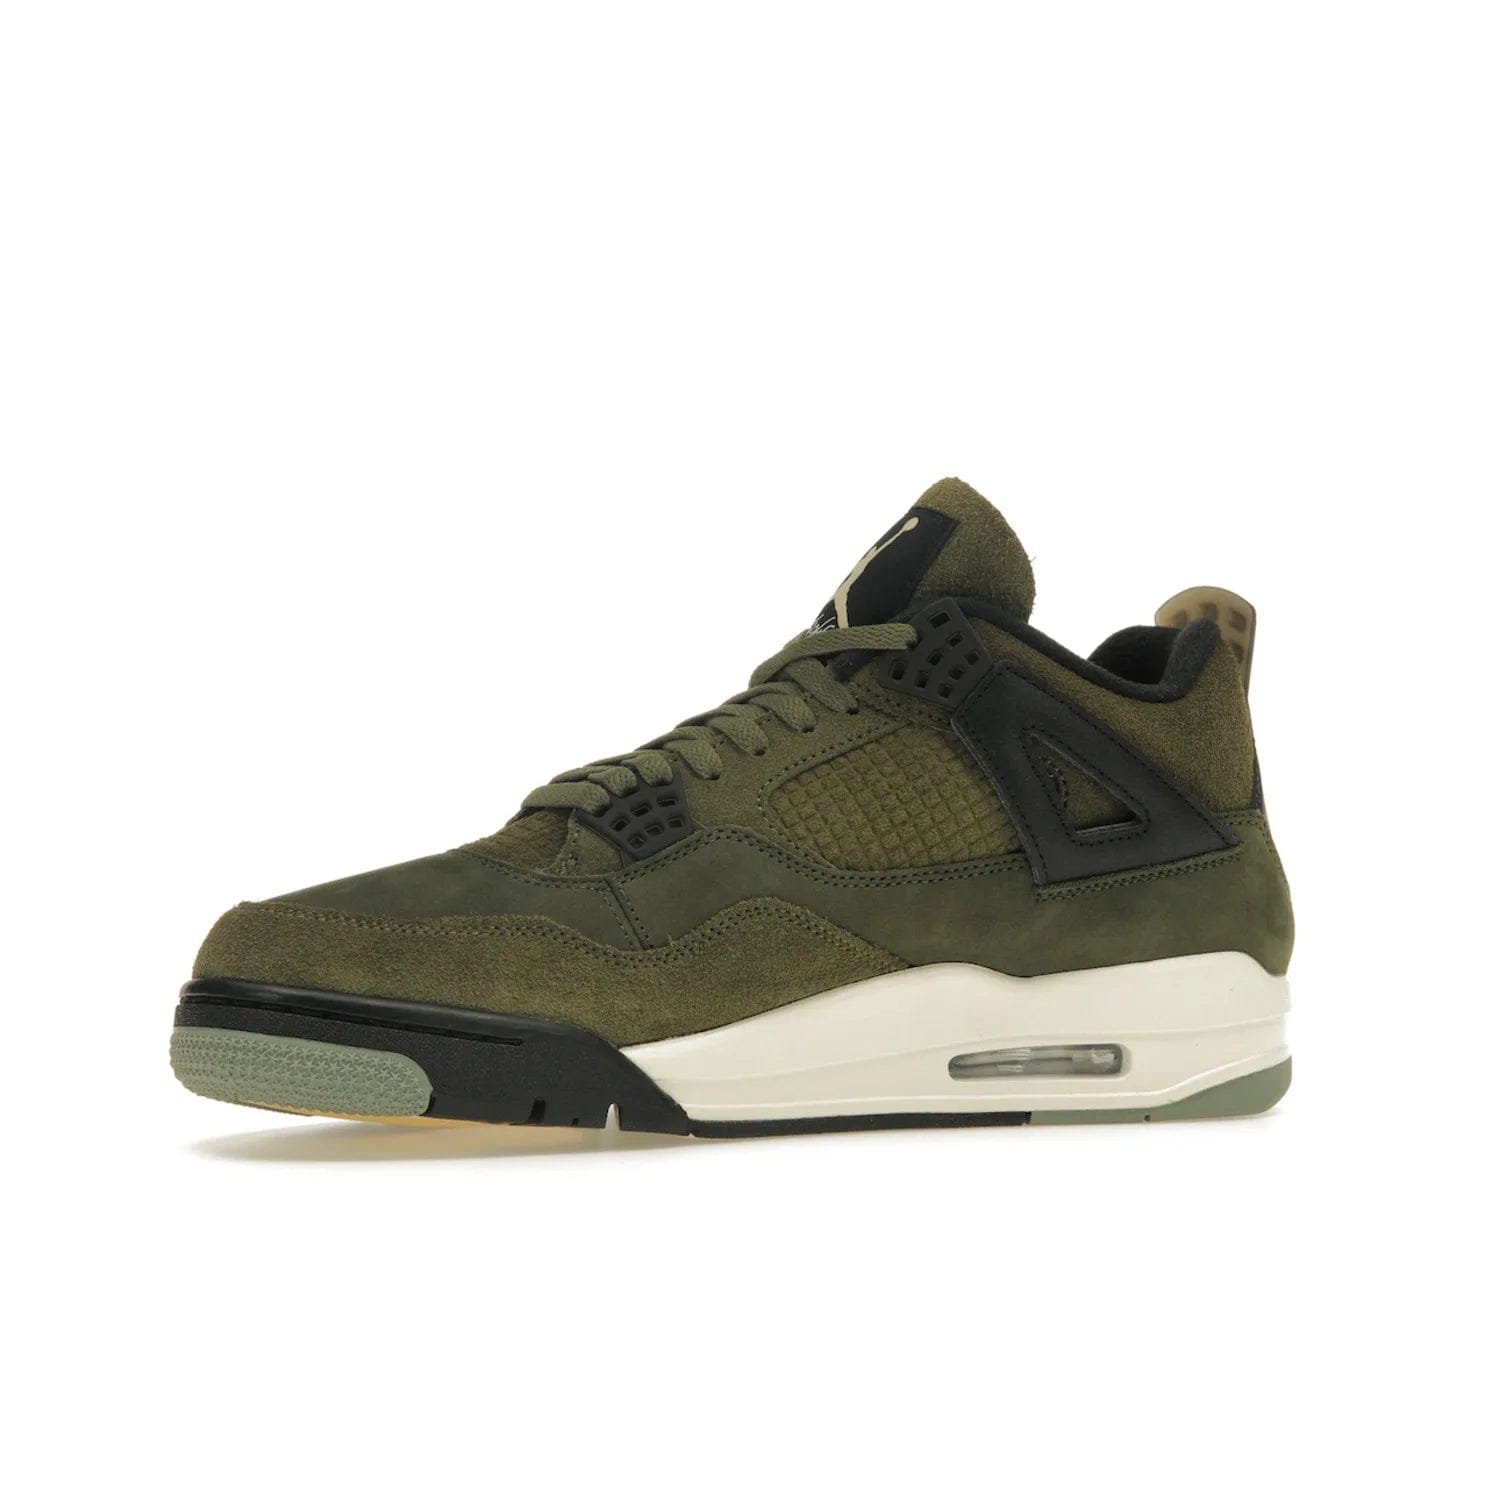 Jordan 4 Retro SE Craft Medium Olive - Image 17 - Only at www.BallersClubKickz.com - Grab the Jordan 4 Retro SE Crafts for a unique style. Combines Medium Olive, Pale Vanilla, Khaki, Black and Sail, with same classic shape, cushioning, and rubber outsole. Available on November 18th!